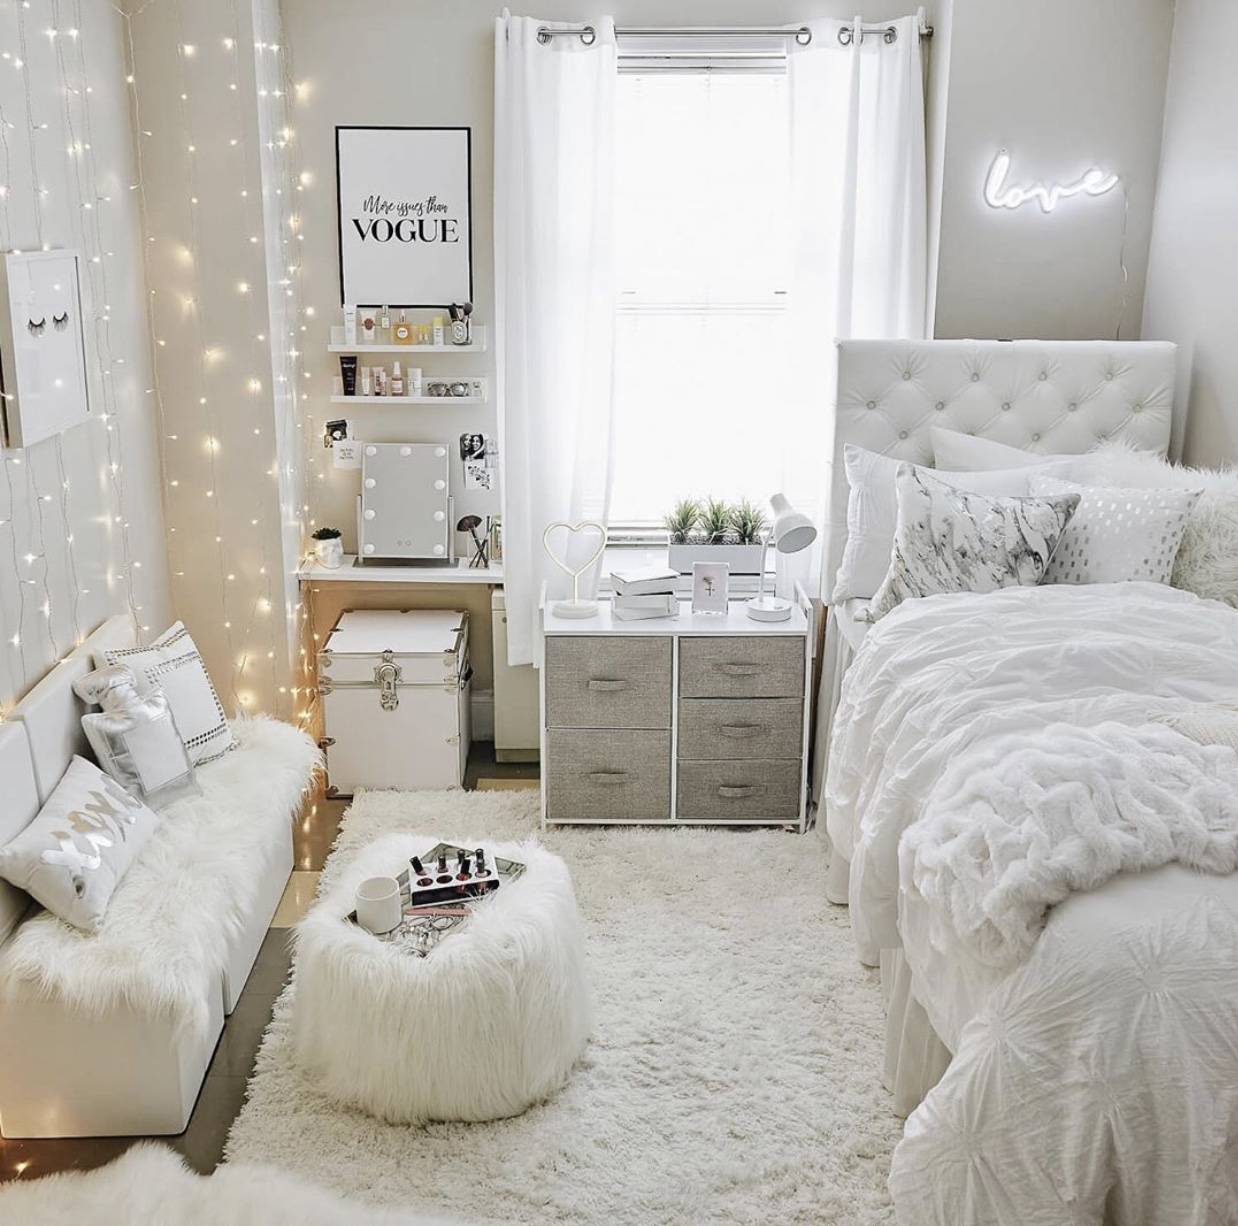 VSCO Room Ideas: How to Create a Cute Vsco Room - The Pink ...